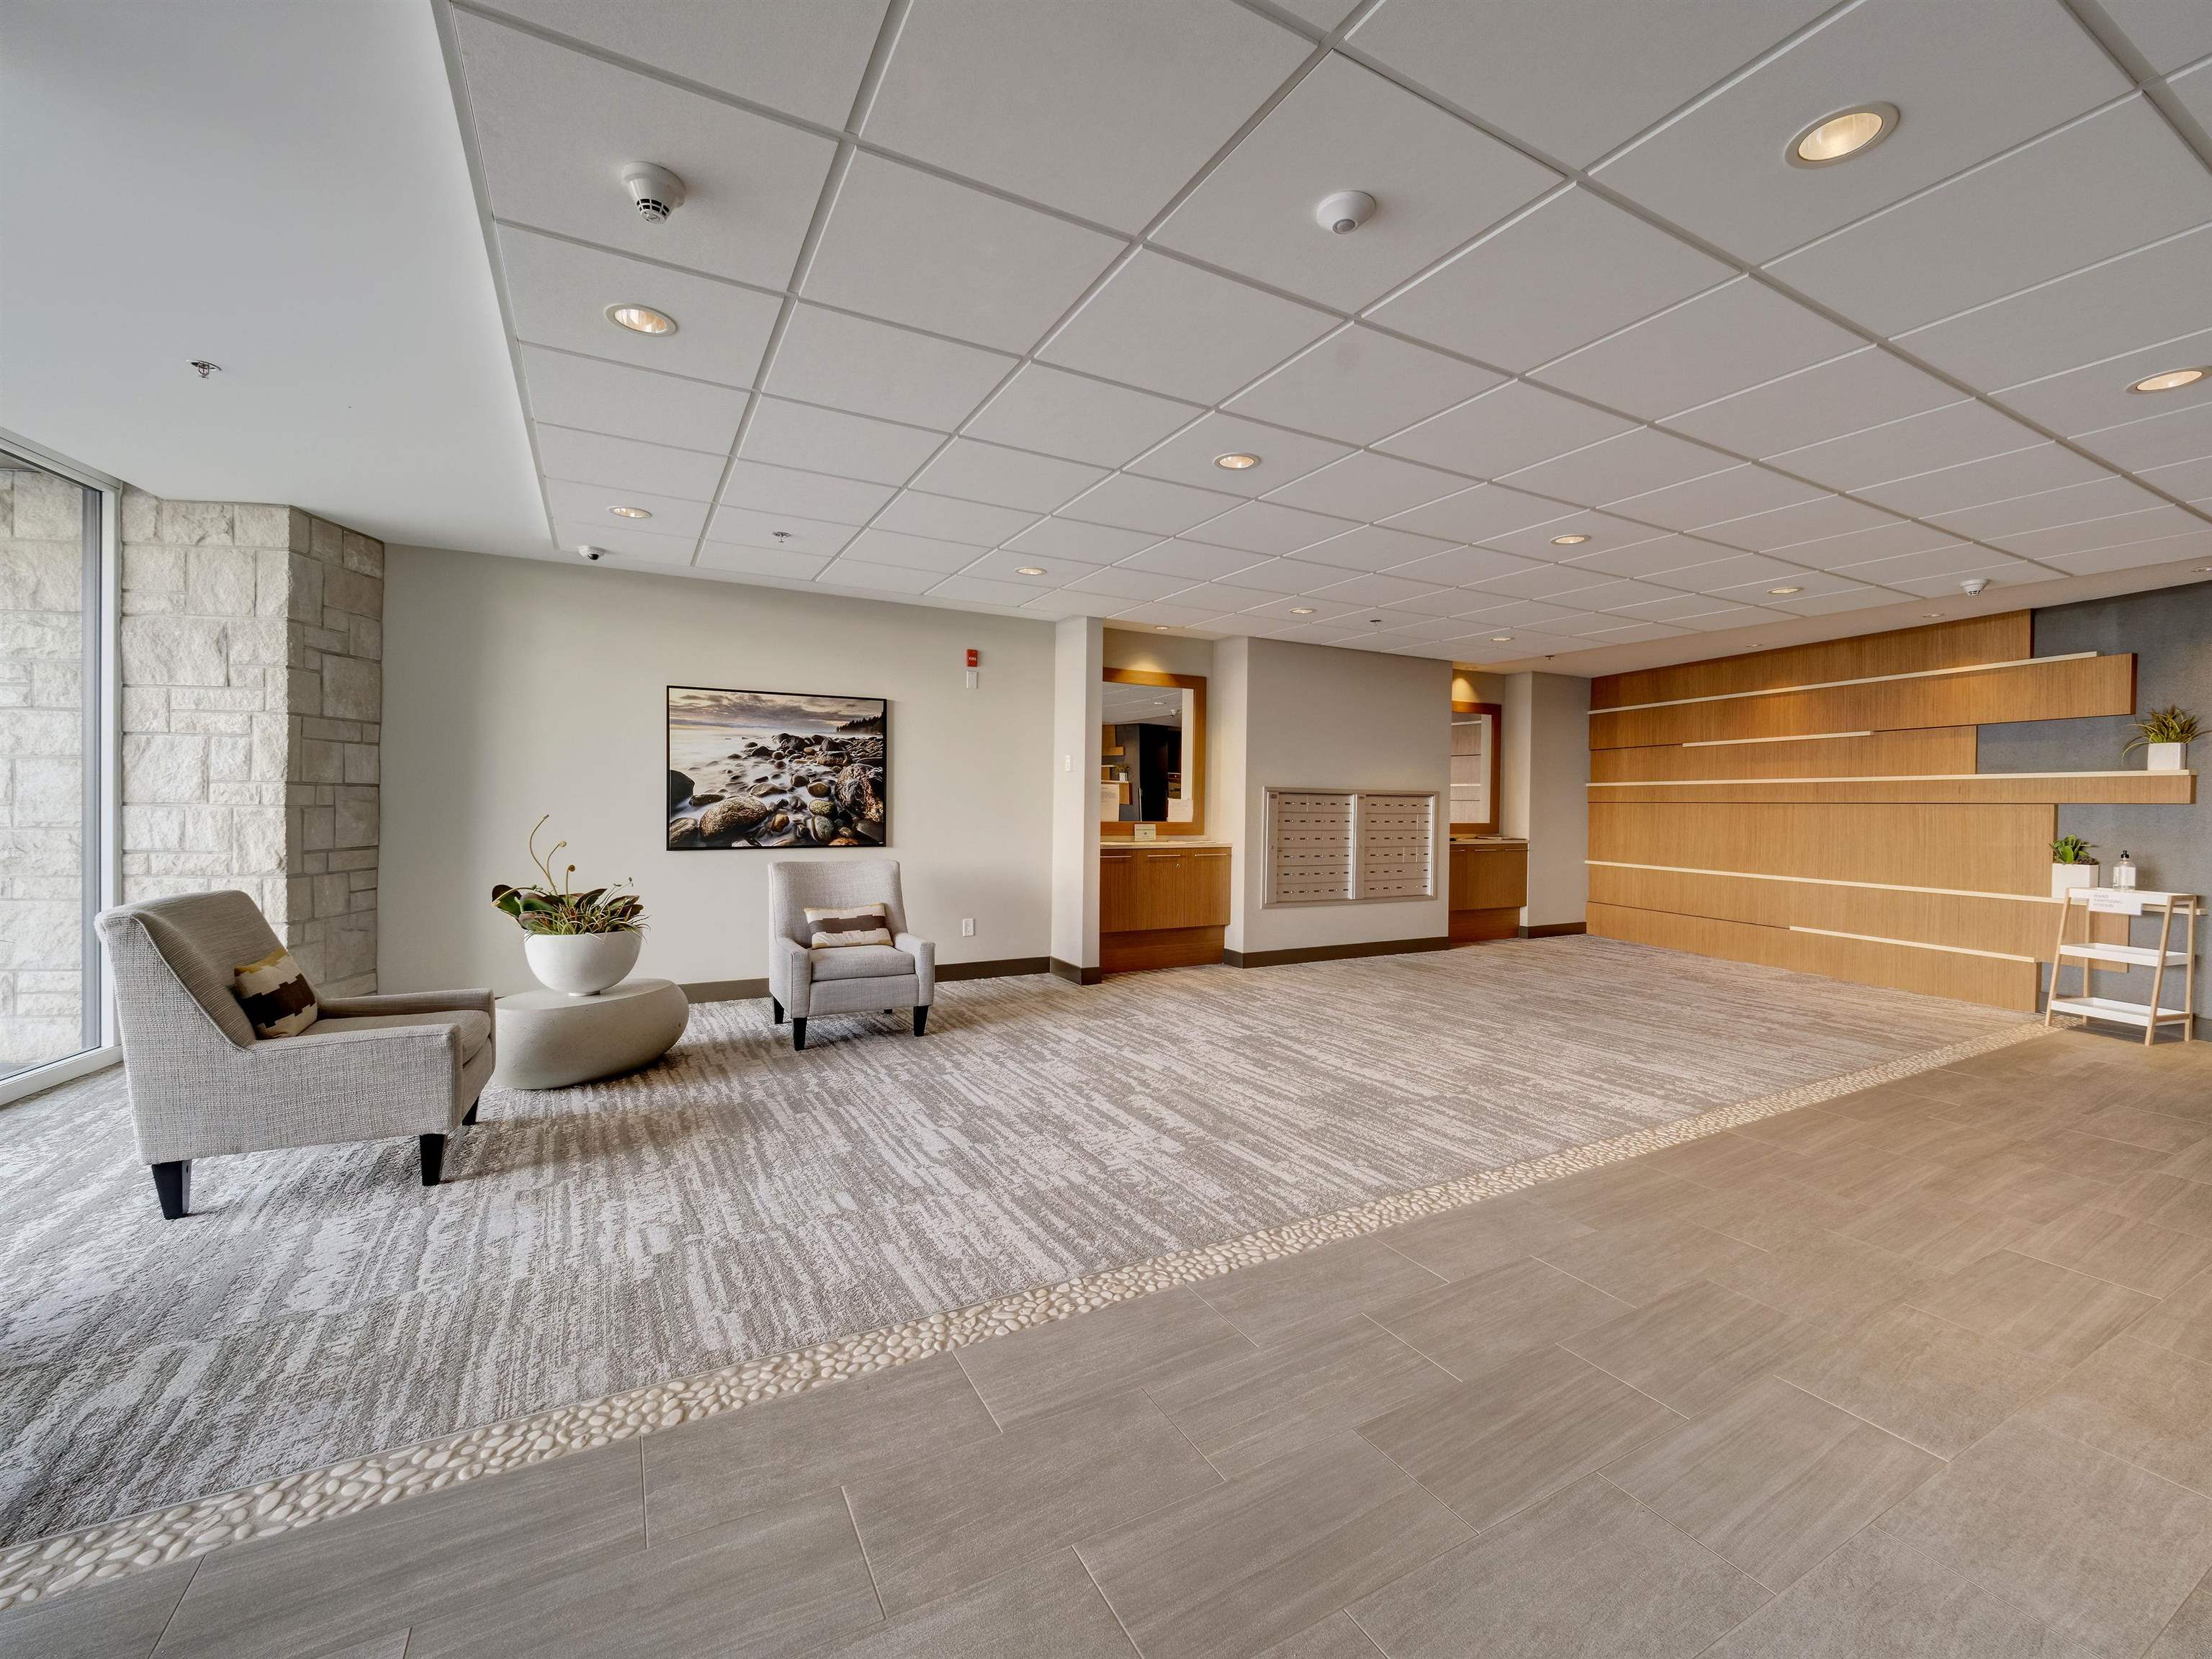 A welcoming lobby where you can relax and meet your neighbors as they come and go. Mailbox pod for convenience. Access to activities room is to the right.